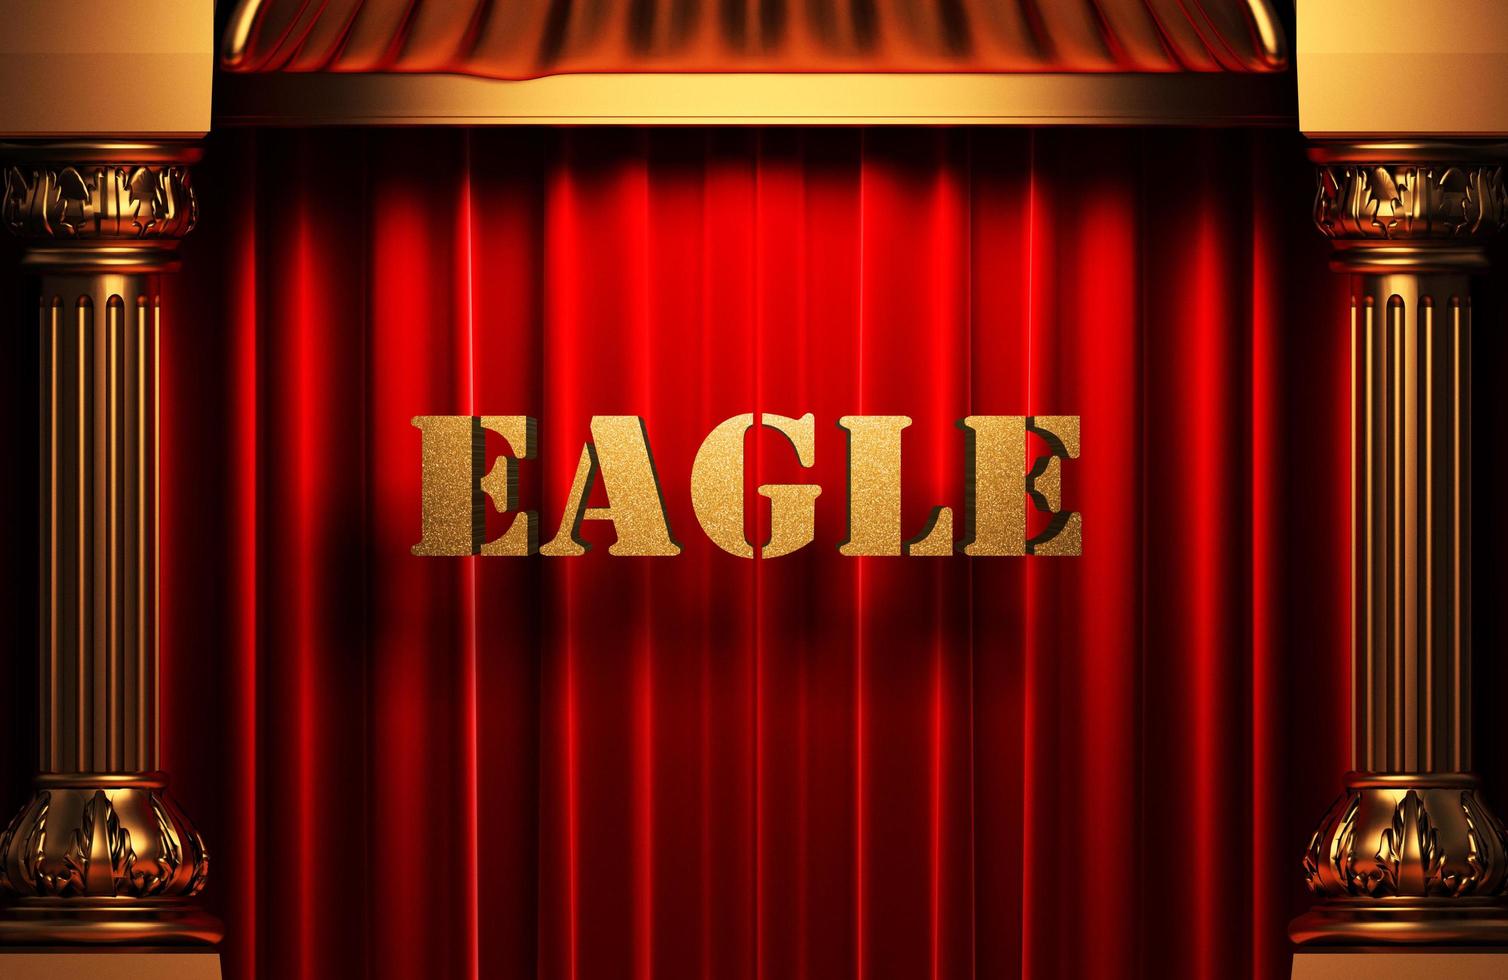 eagle golden word on red curtain photo